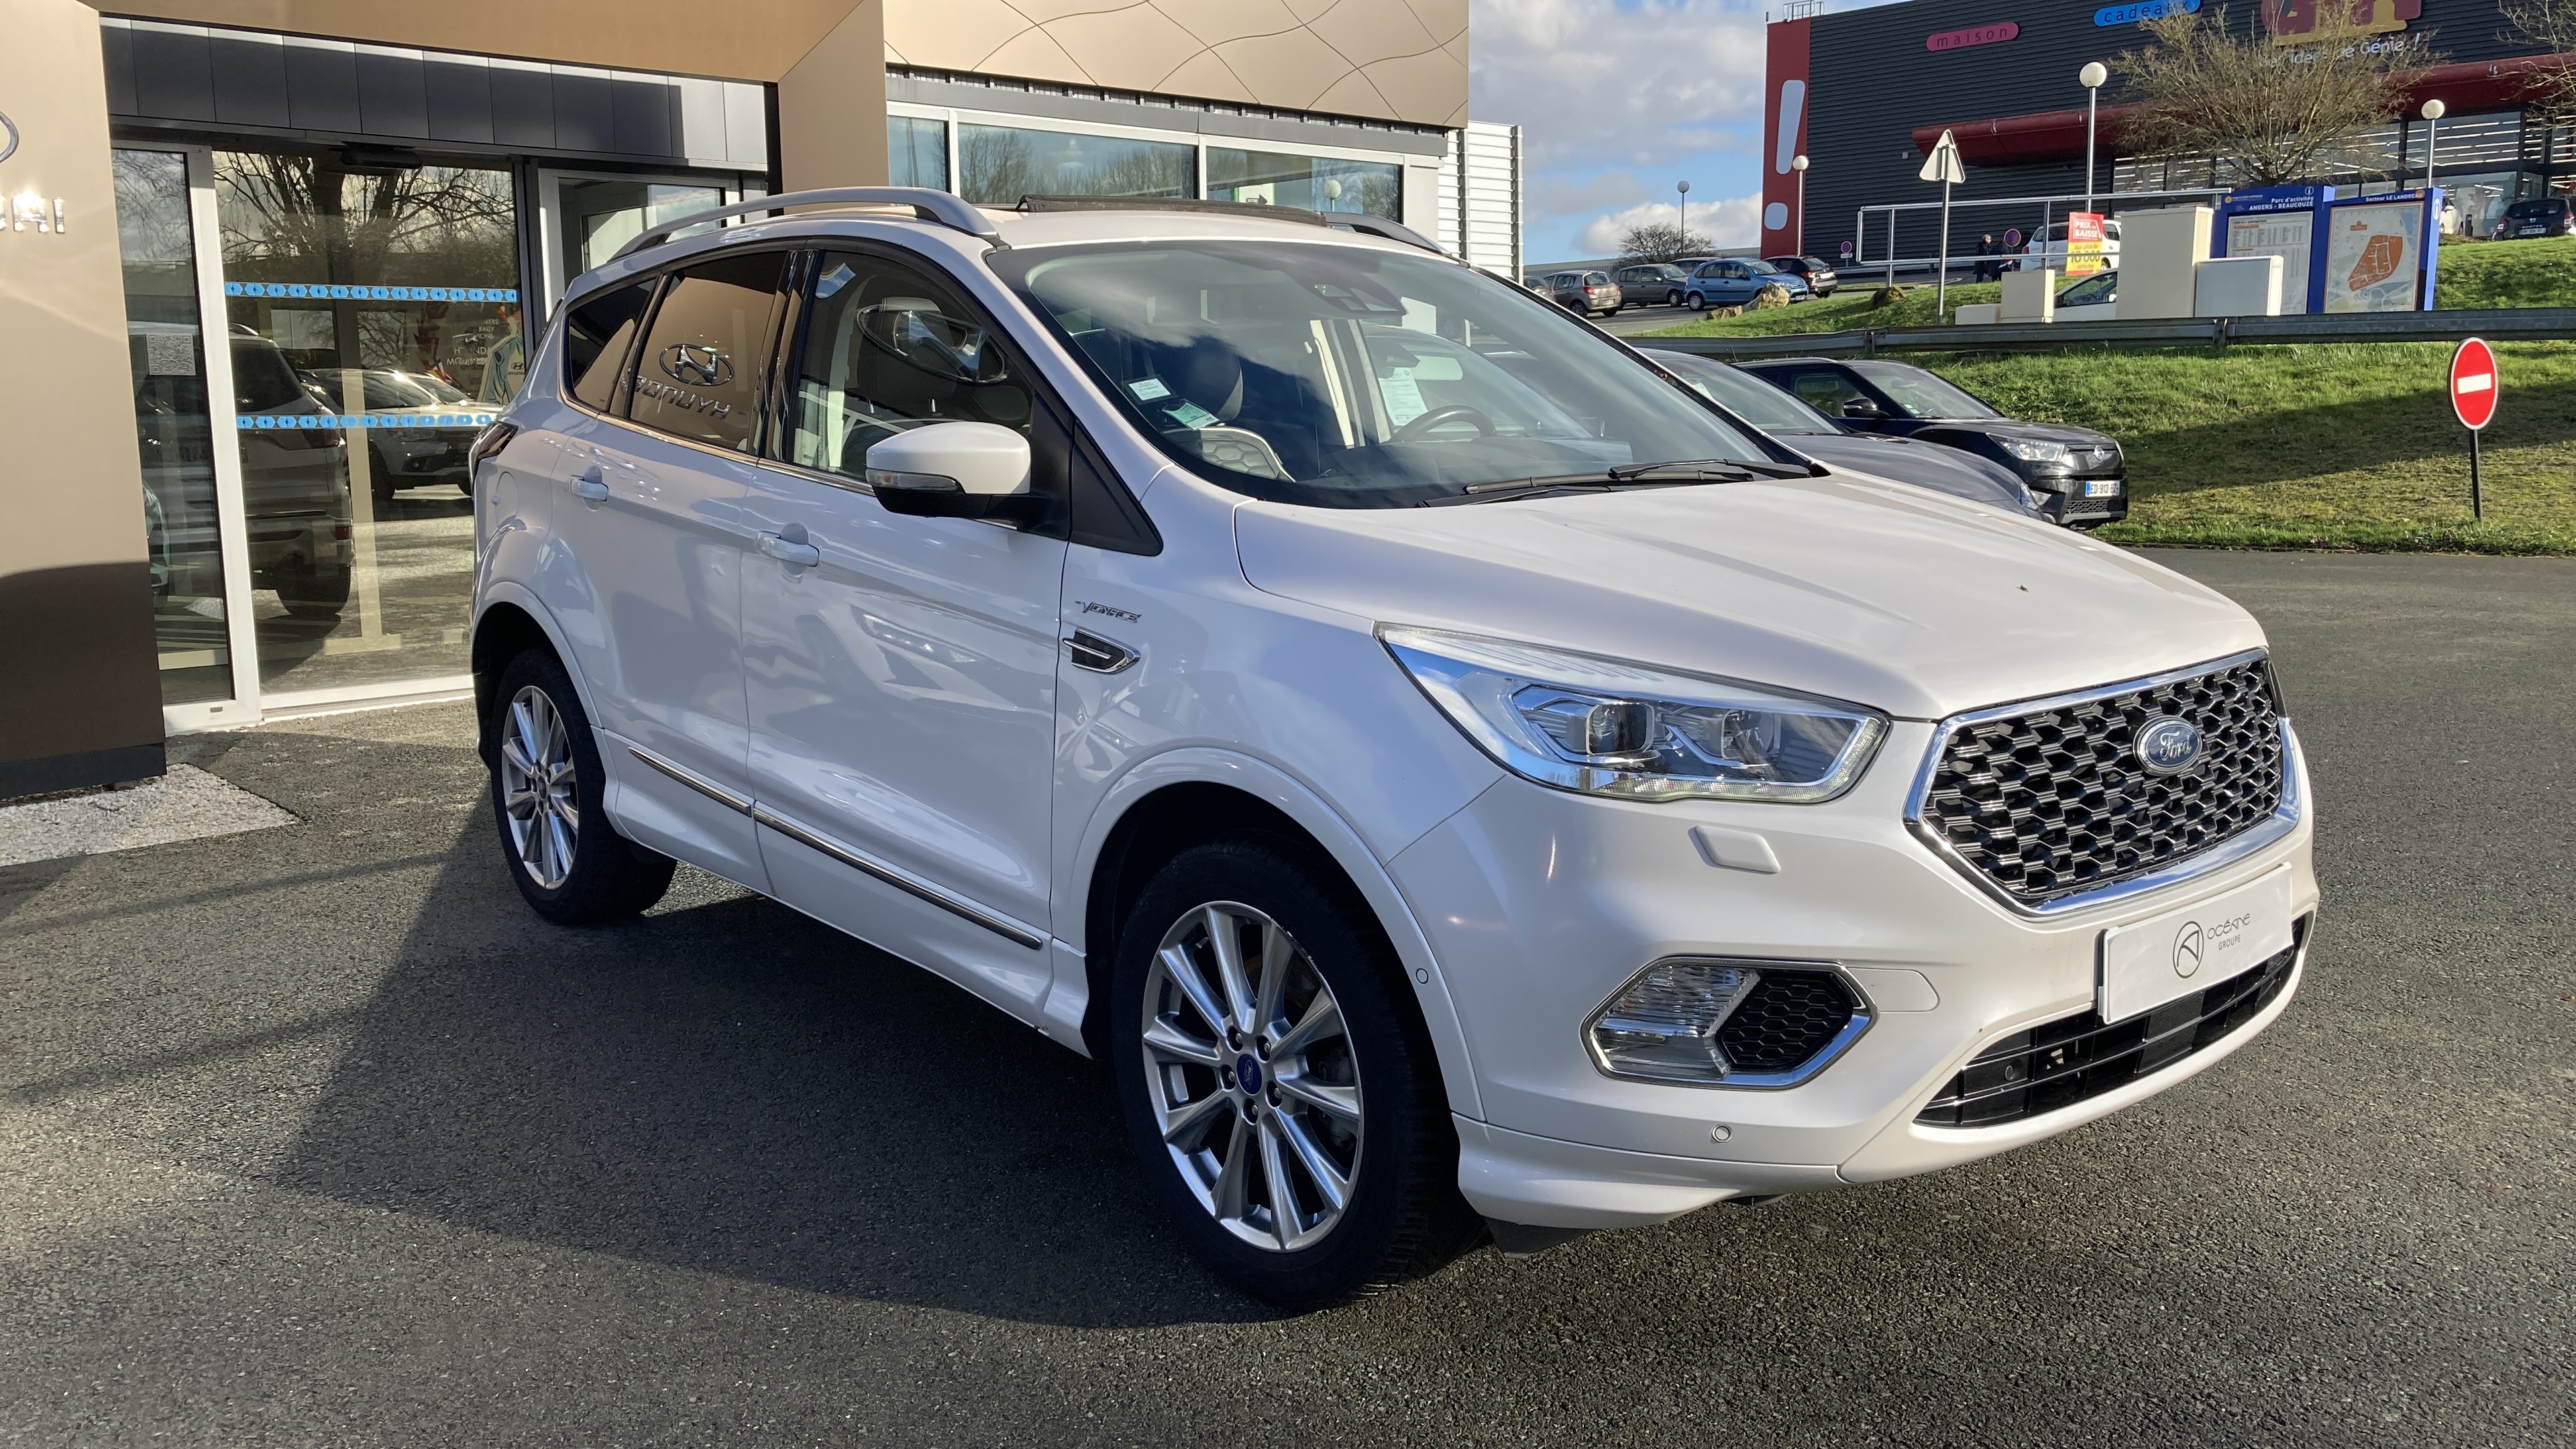 FORD Kuga Vignale 2.0 TDCi 180 S&S 4x4 Powershift  - Véhicule Occasion Océane Auto